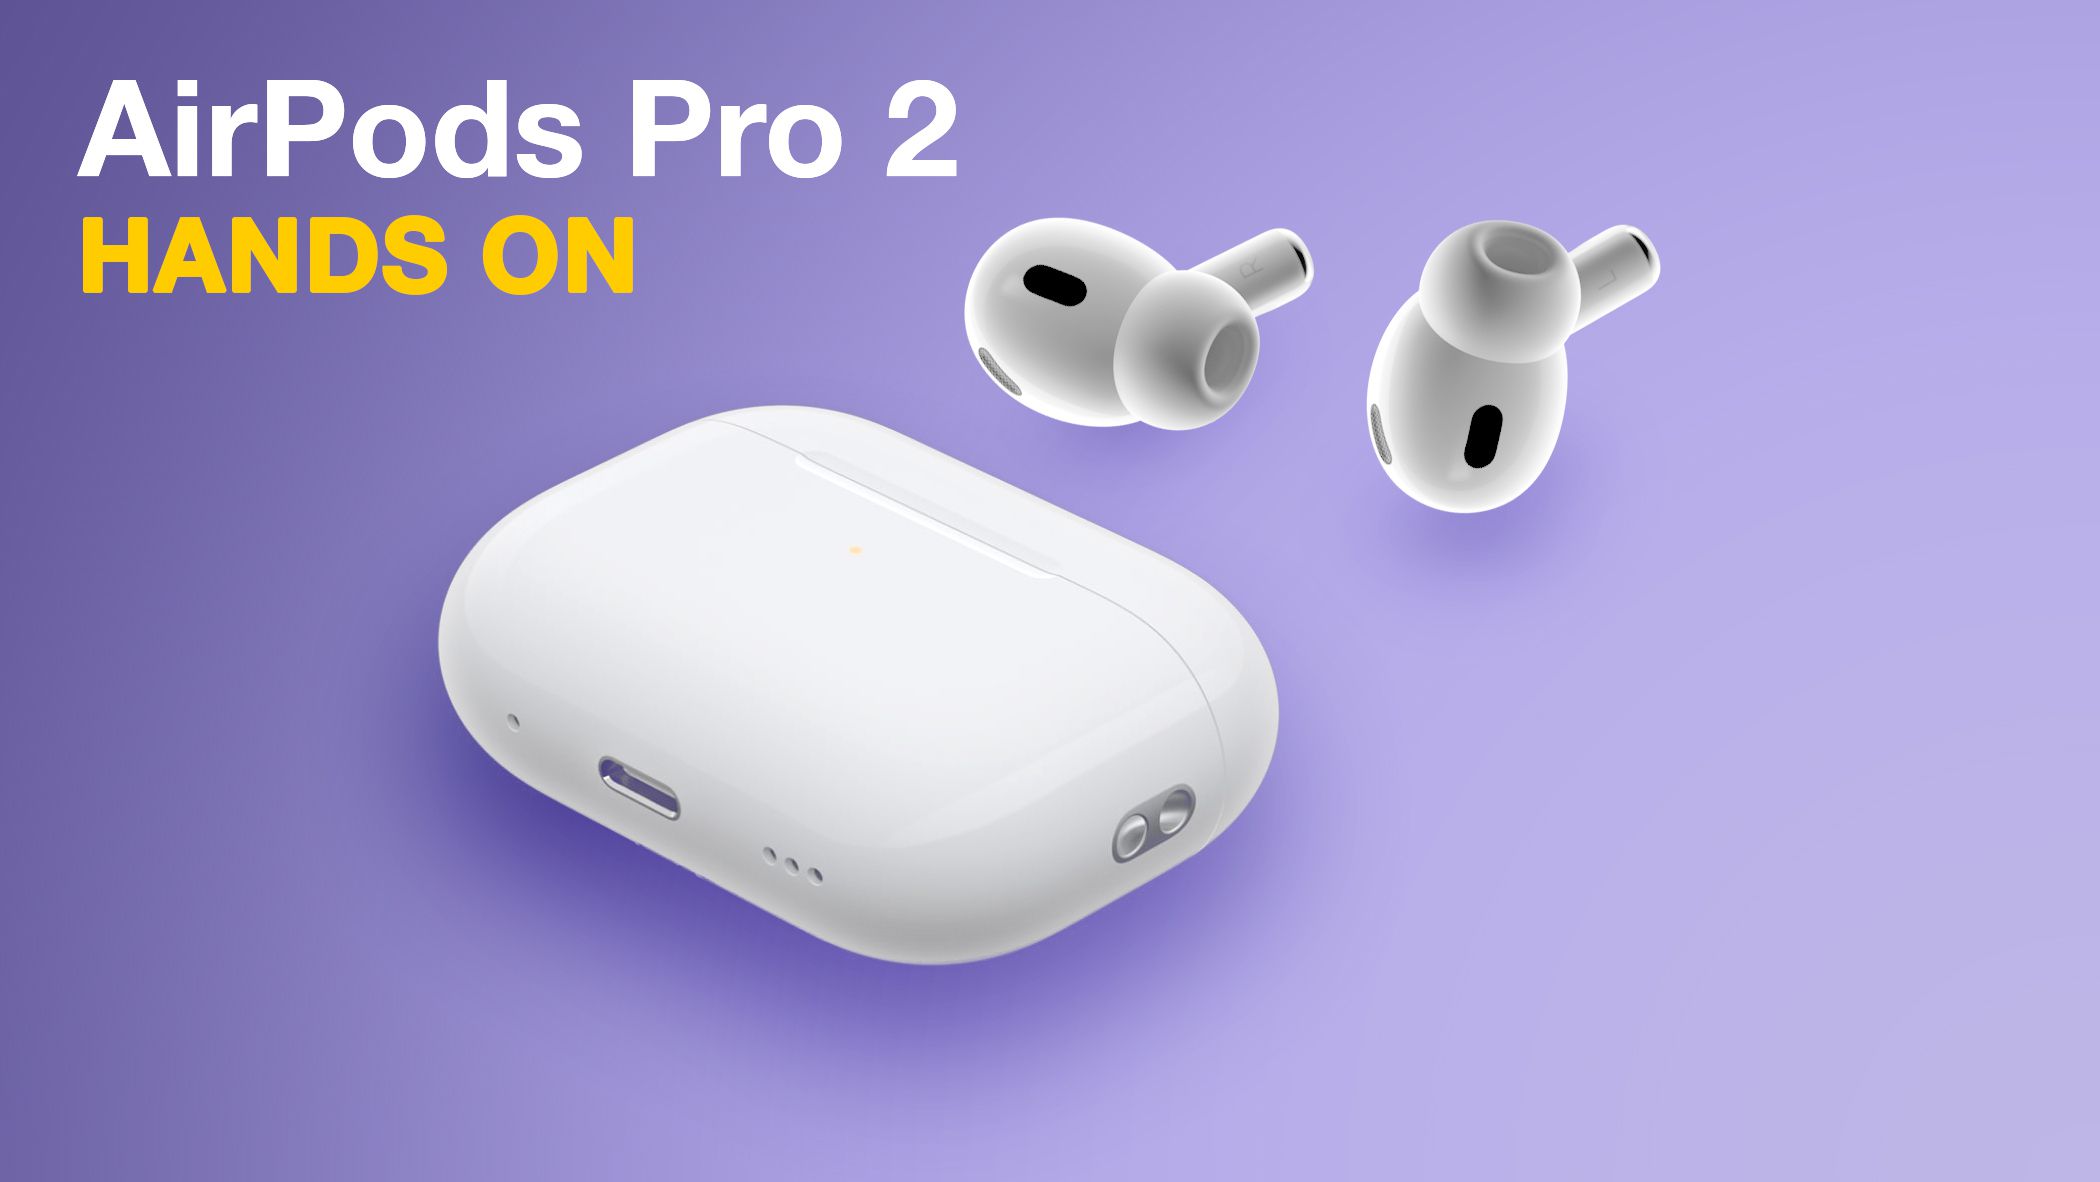 Hands-On With the New AirPods Pro 2